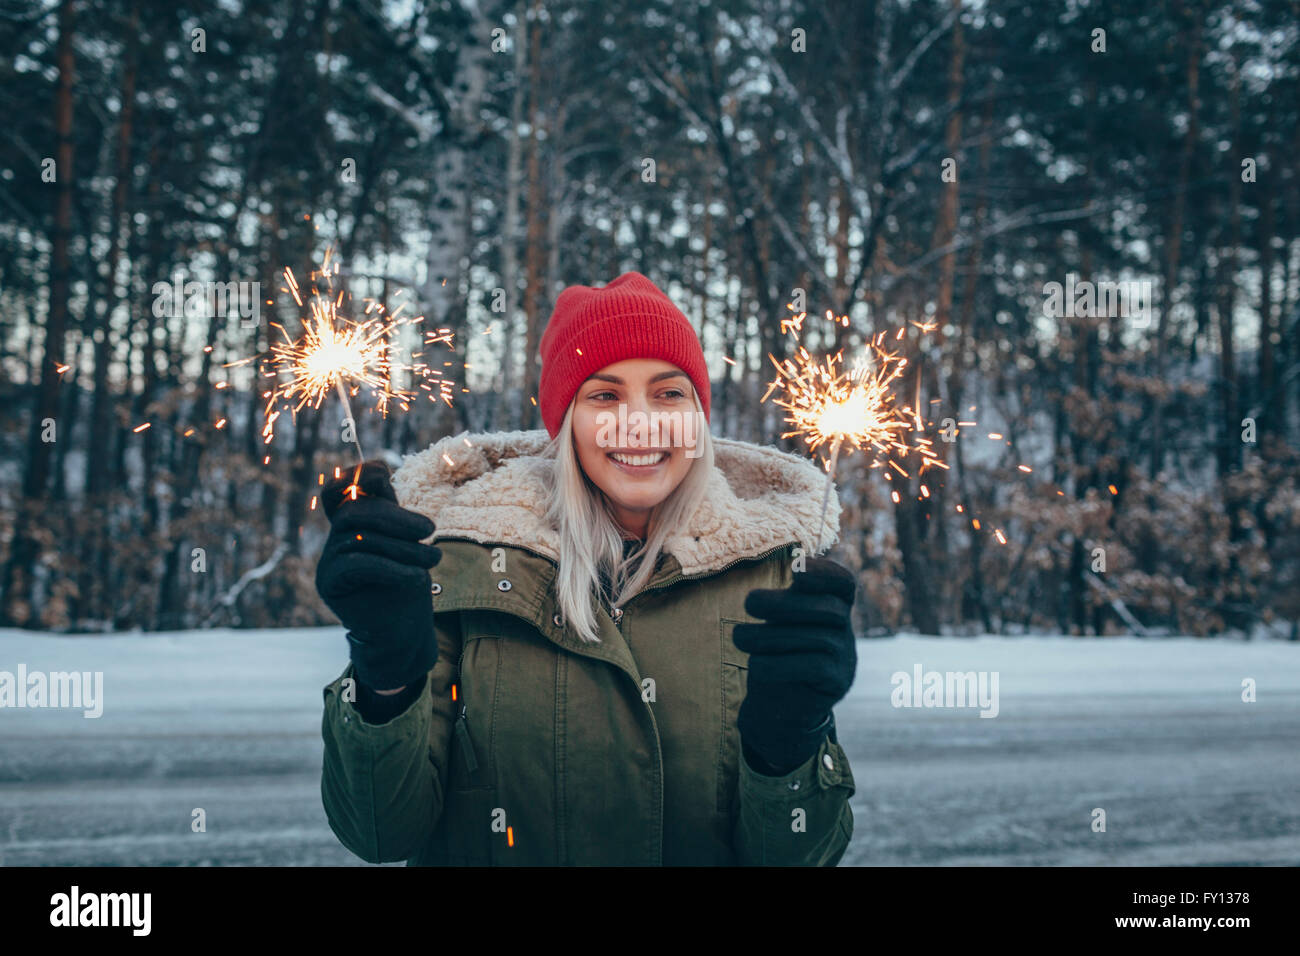 Smiling woman holding sparklers during winter Stock Photo